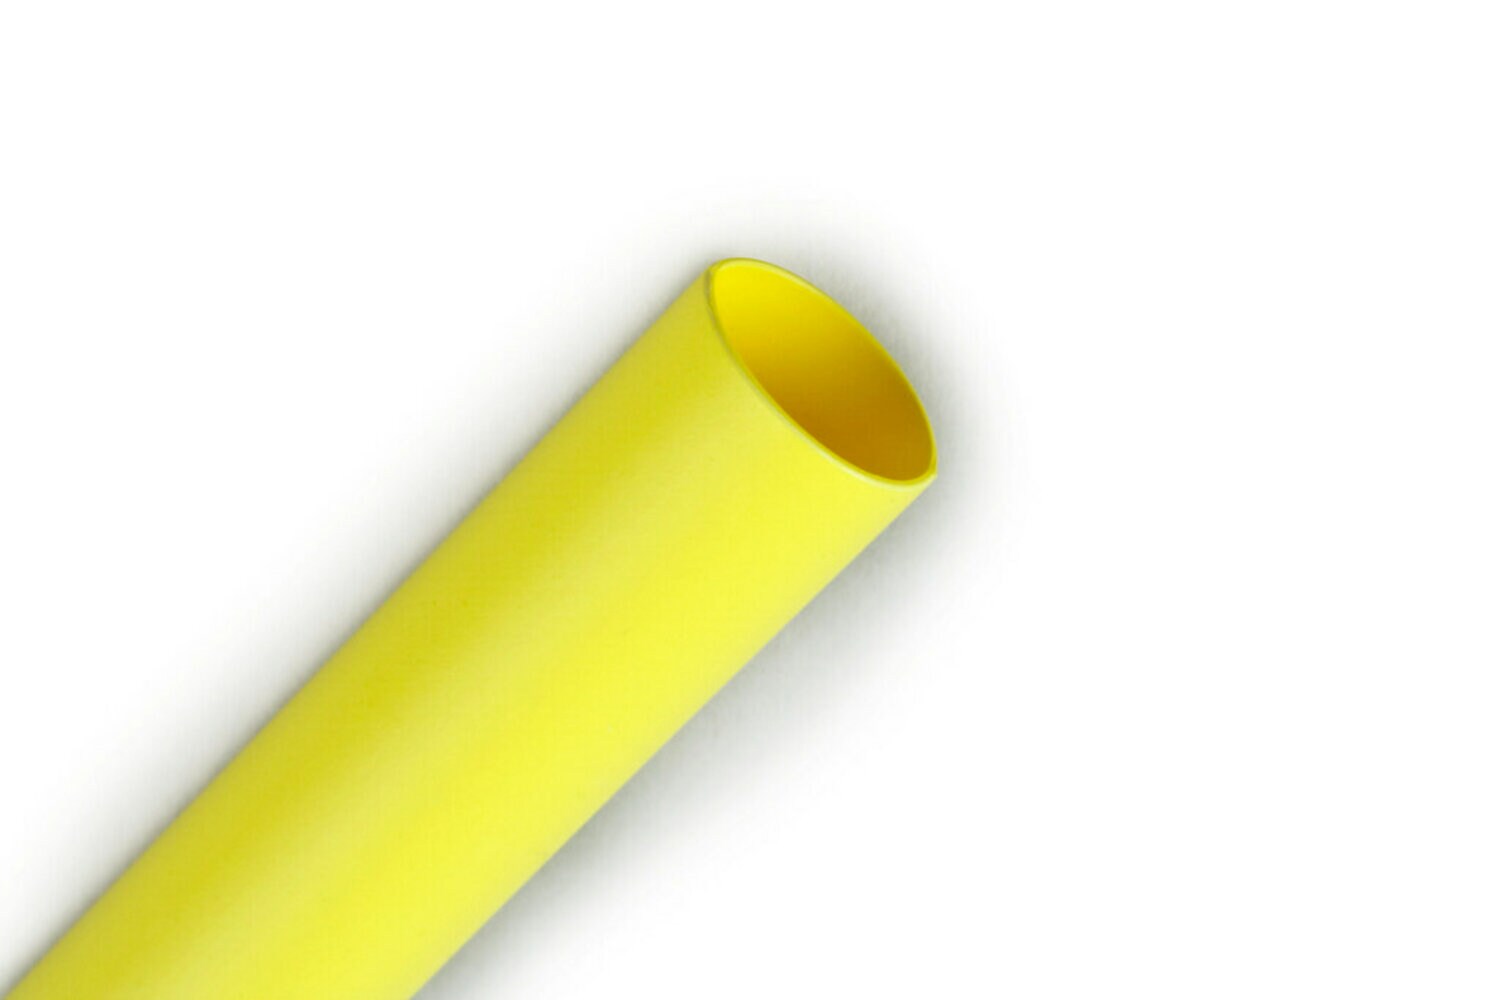 7000057978 - 3M Heat Shrink Thin-Wall Tubing FP-301-2-Yellow-100`: 100 ft spool
length, 200 linear ft/box, 76200 Meter/Case